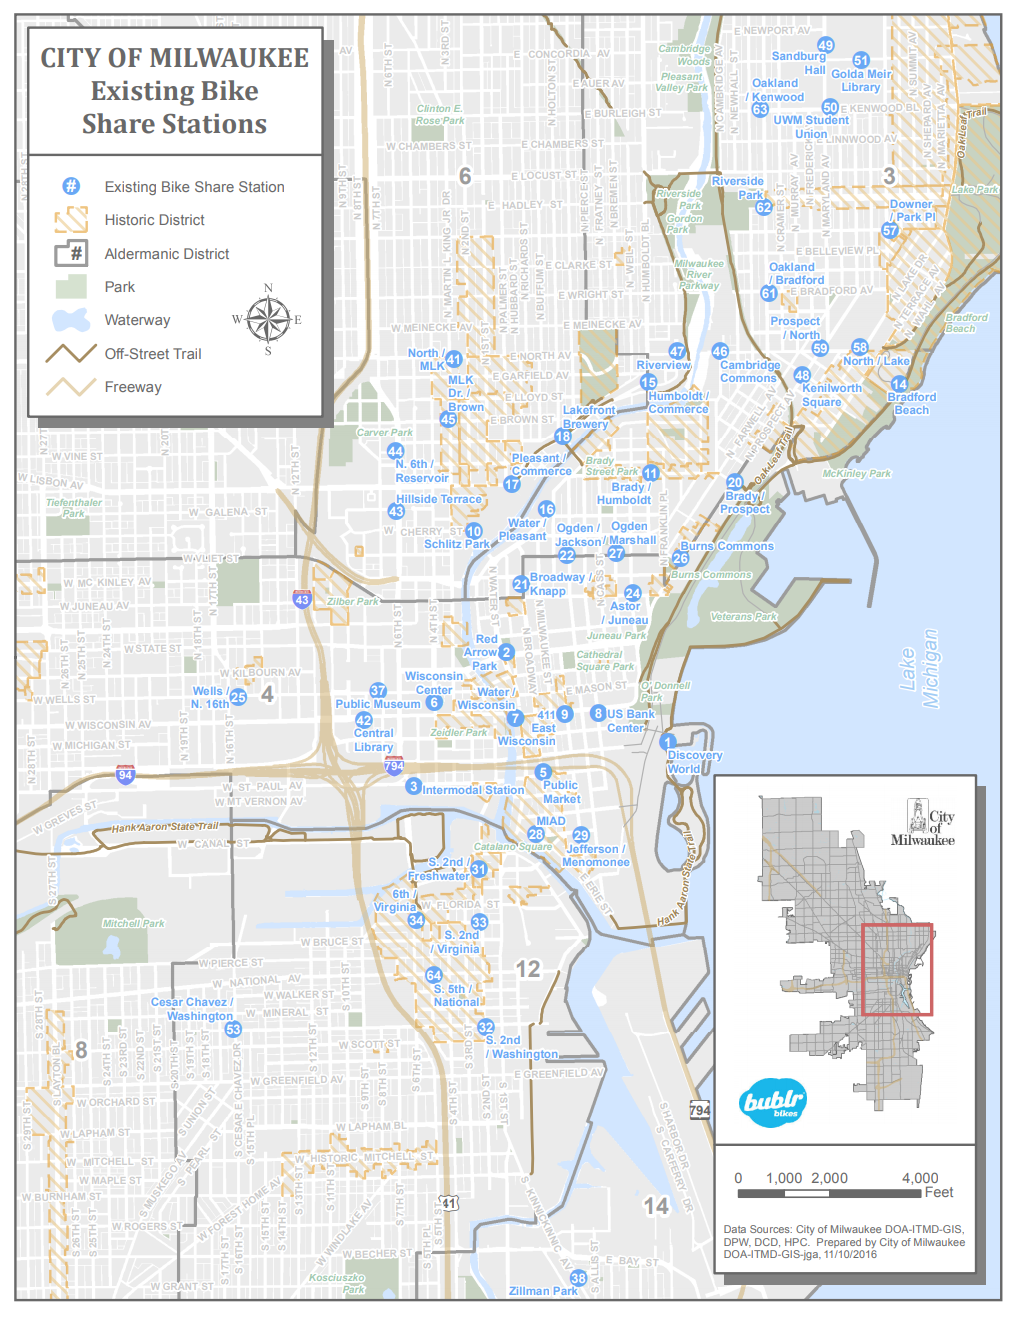 Map of Milwaukee using points to show bike share stations, see caption and text surrounding image